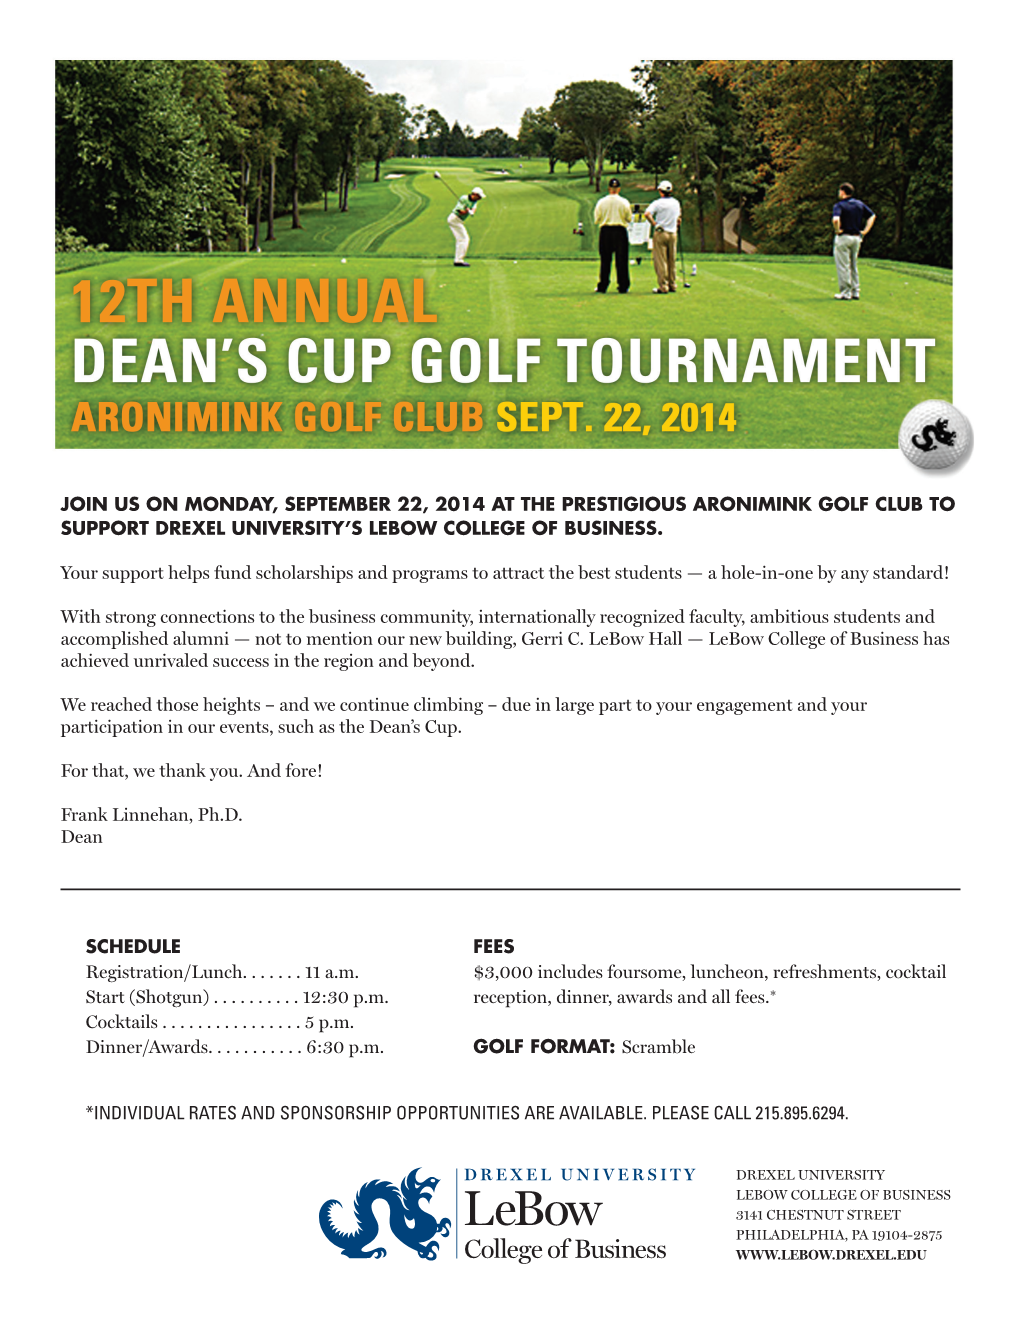 Join Us on Monday, September 22, 2014 at the Prestigious Aronimink Golf Club to Support Drexel University’S Lebow College of Business